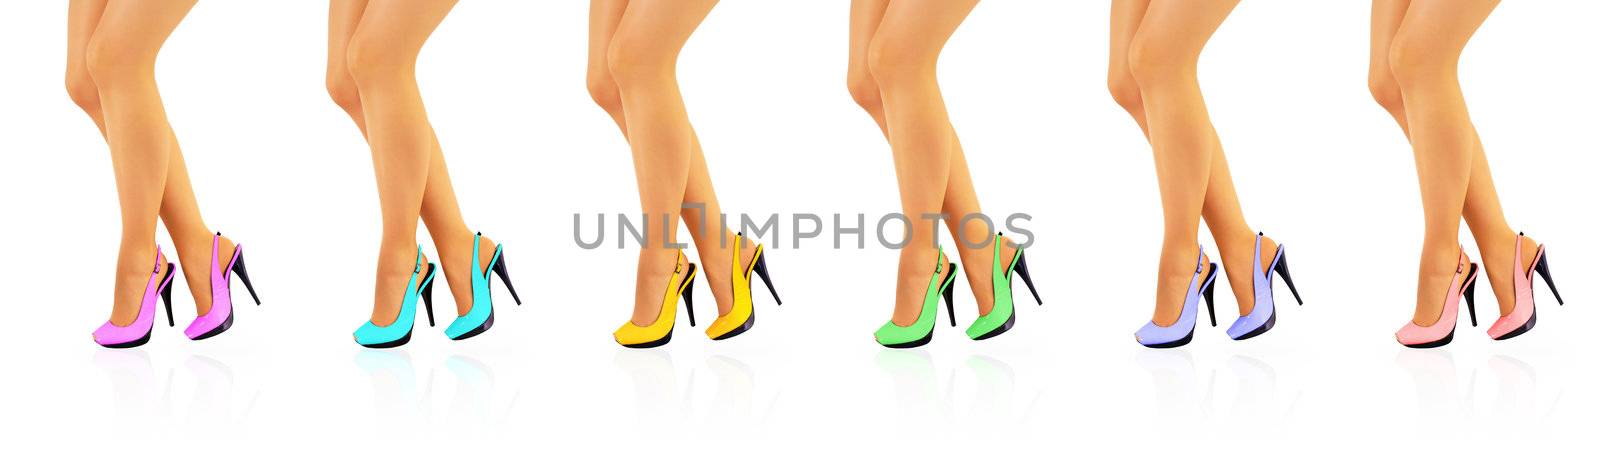 Collage - beautiful women legs in color high heels isolated on white background